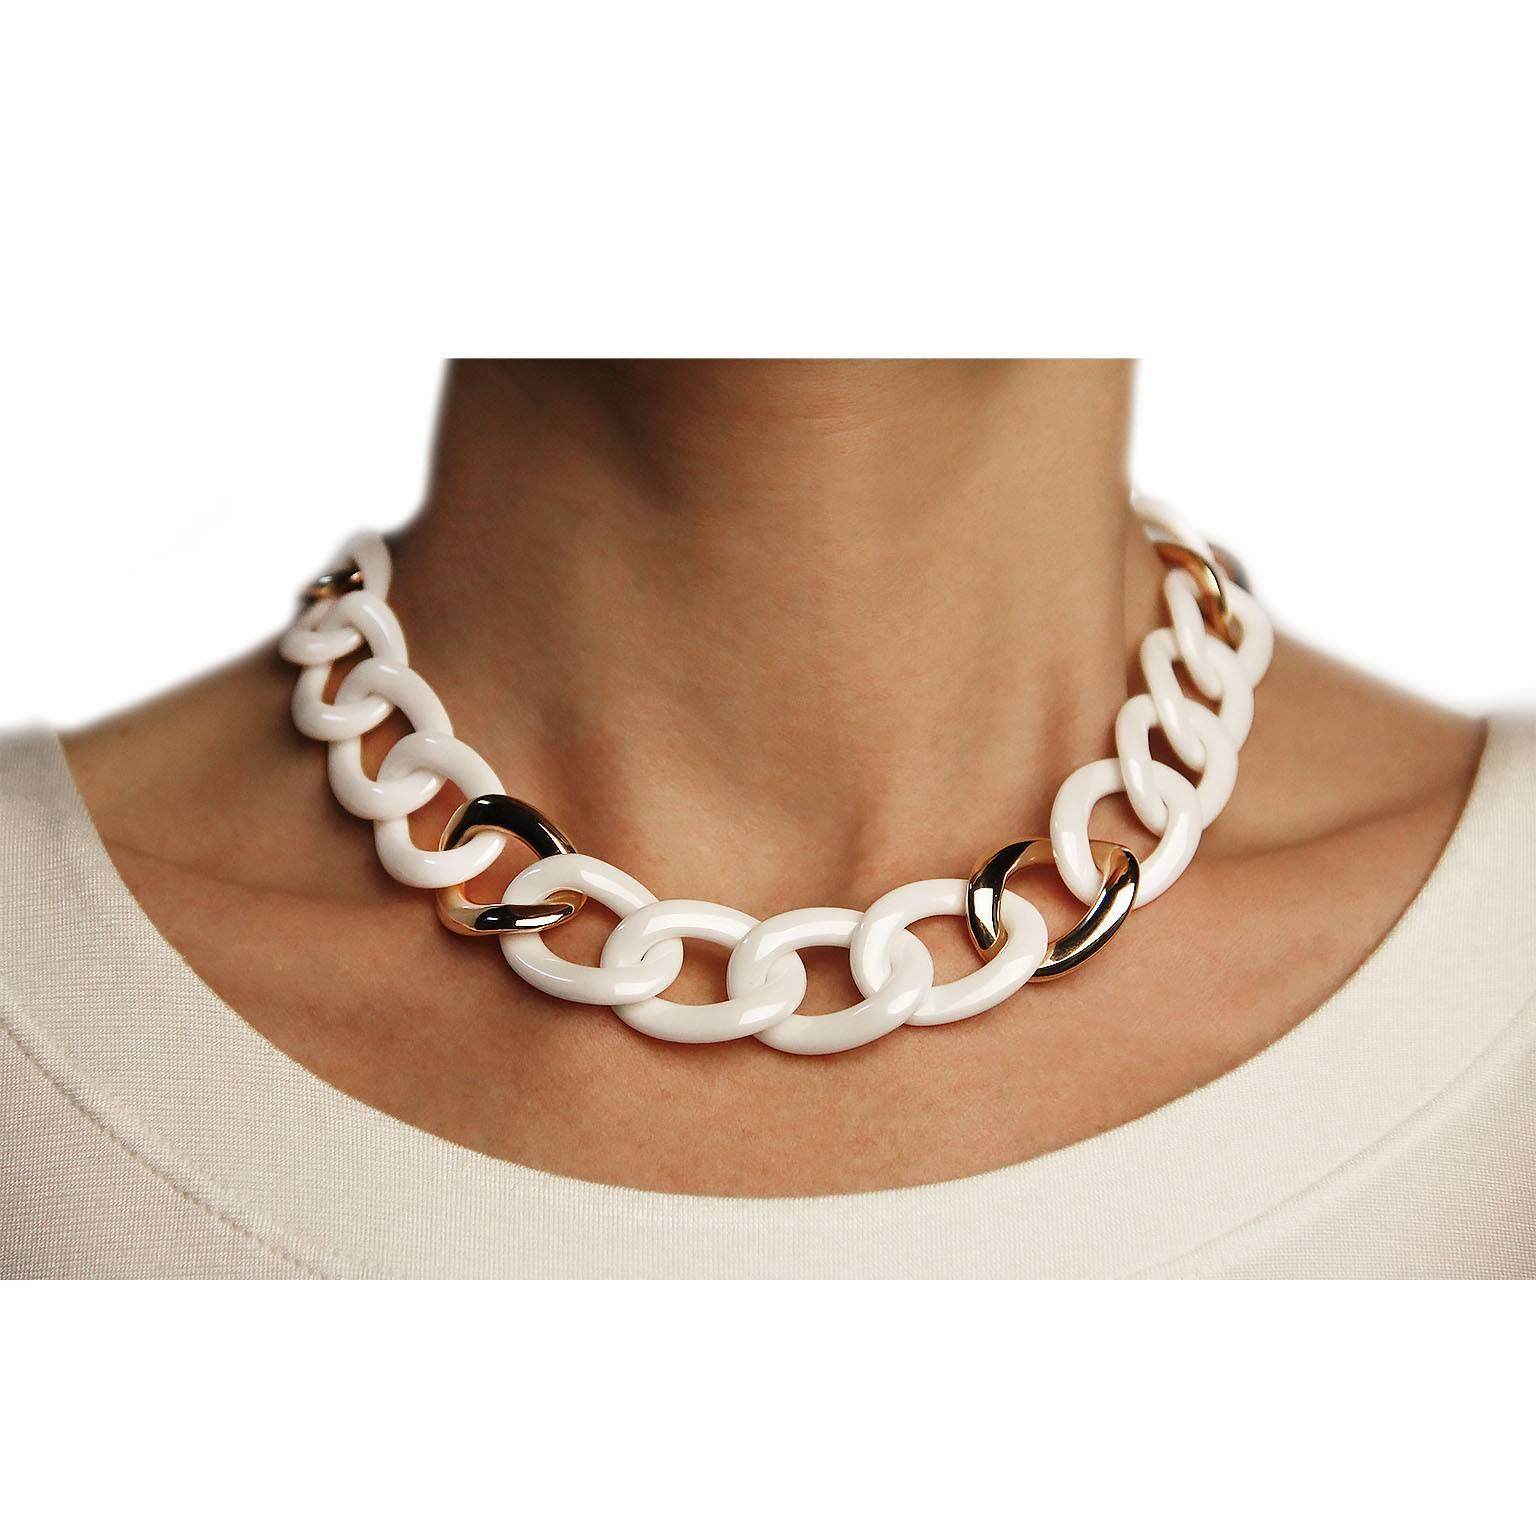 Jona design collection, hand crafted 18k rose gold and white high-tech
ceramic curb-link necklace. 
Dimensions :  H x 21 cm, L x 44.5 cm, D x 0.6 cm - H x 8.26 in, L x 17.51 in, D x 0.23 in.
With a hardness approaching that of diamond, high-tech